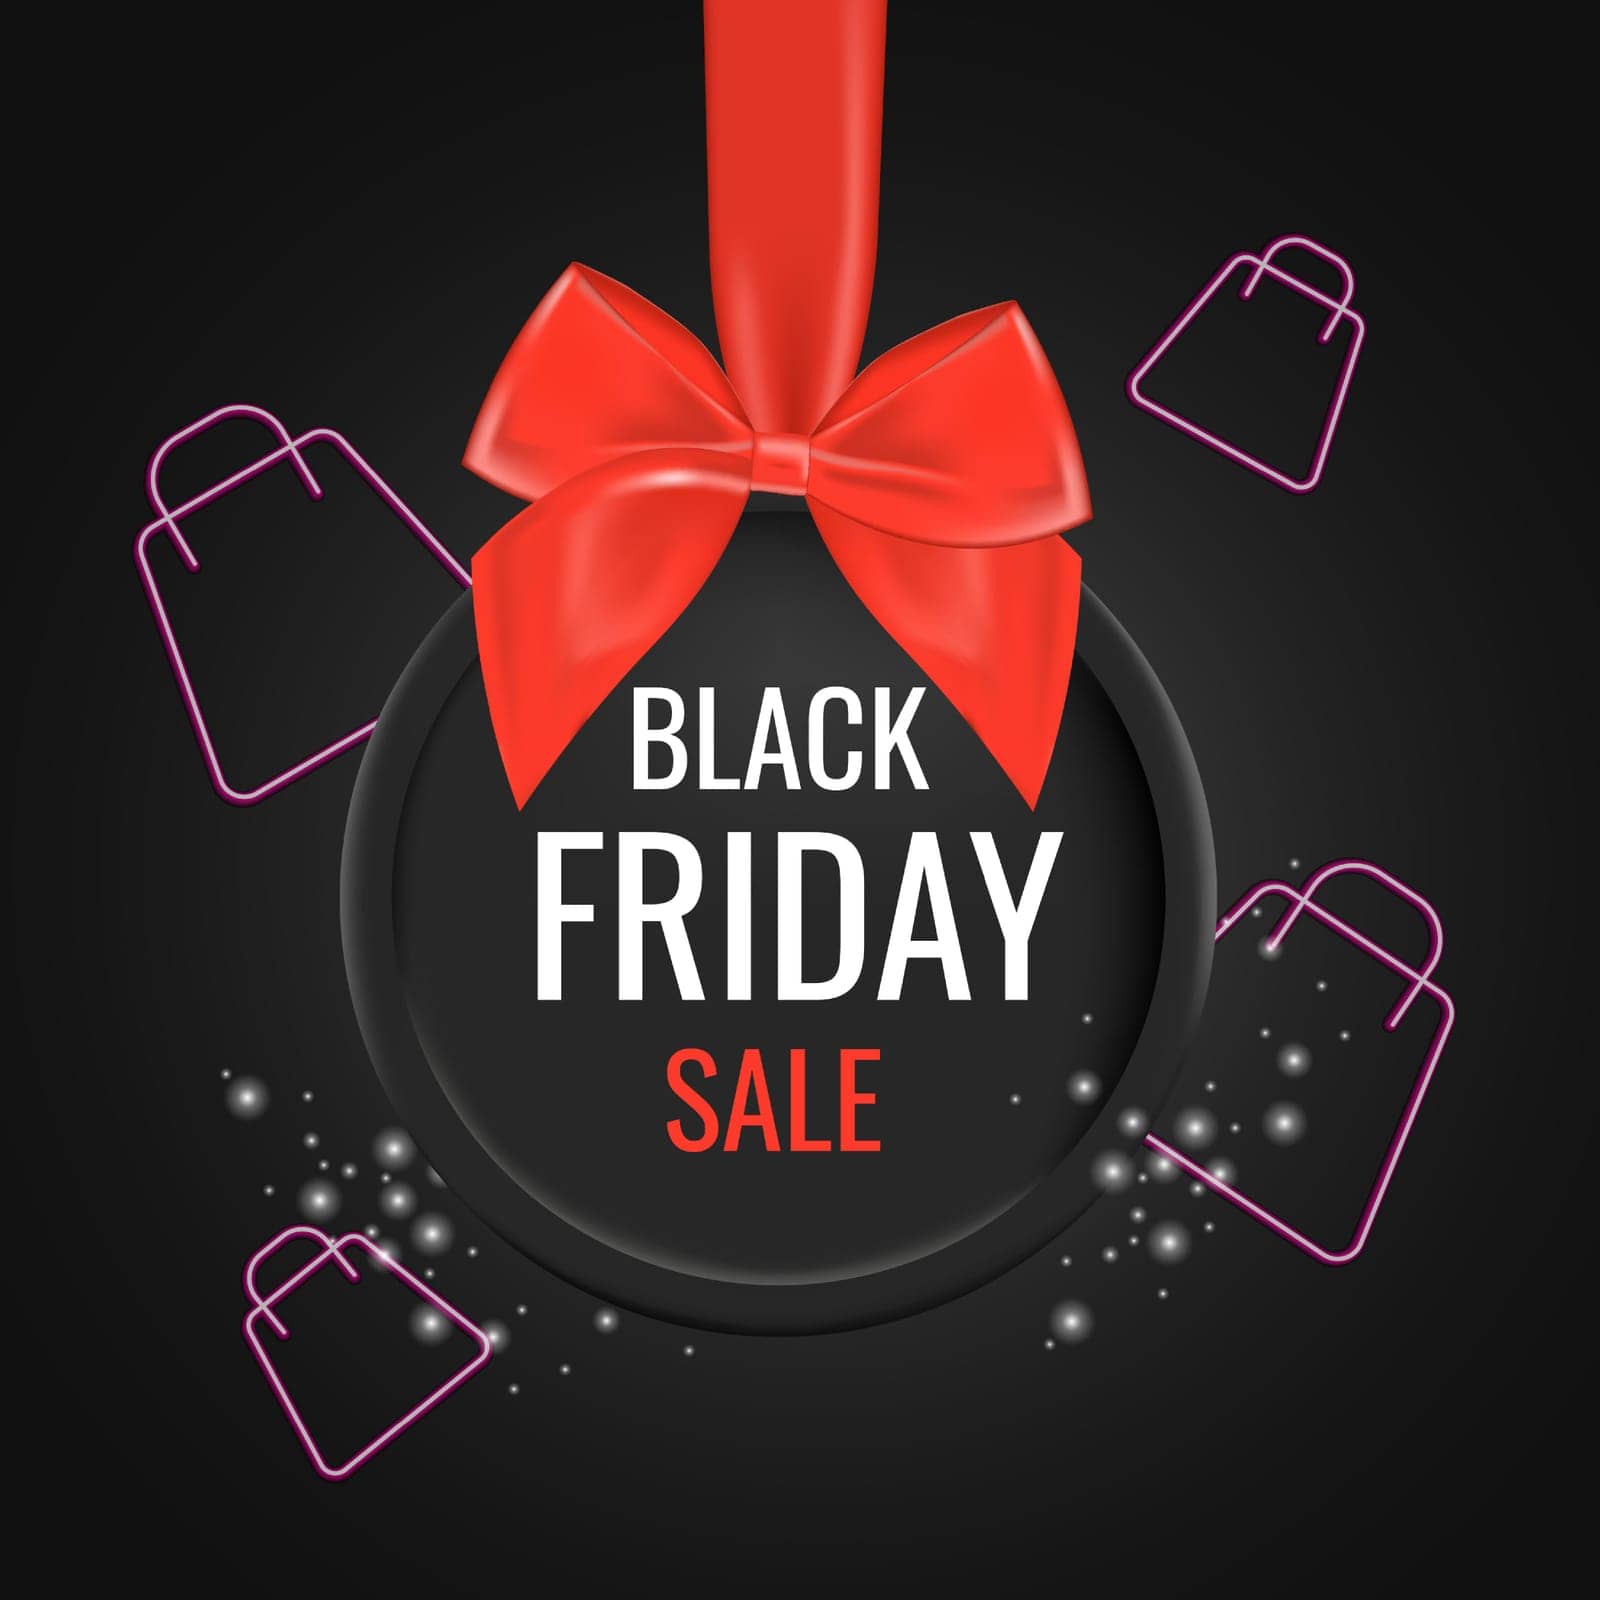 Black Friday sale black tag, round banner, Copy space for text advertising. vector illustration.